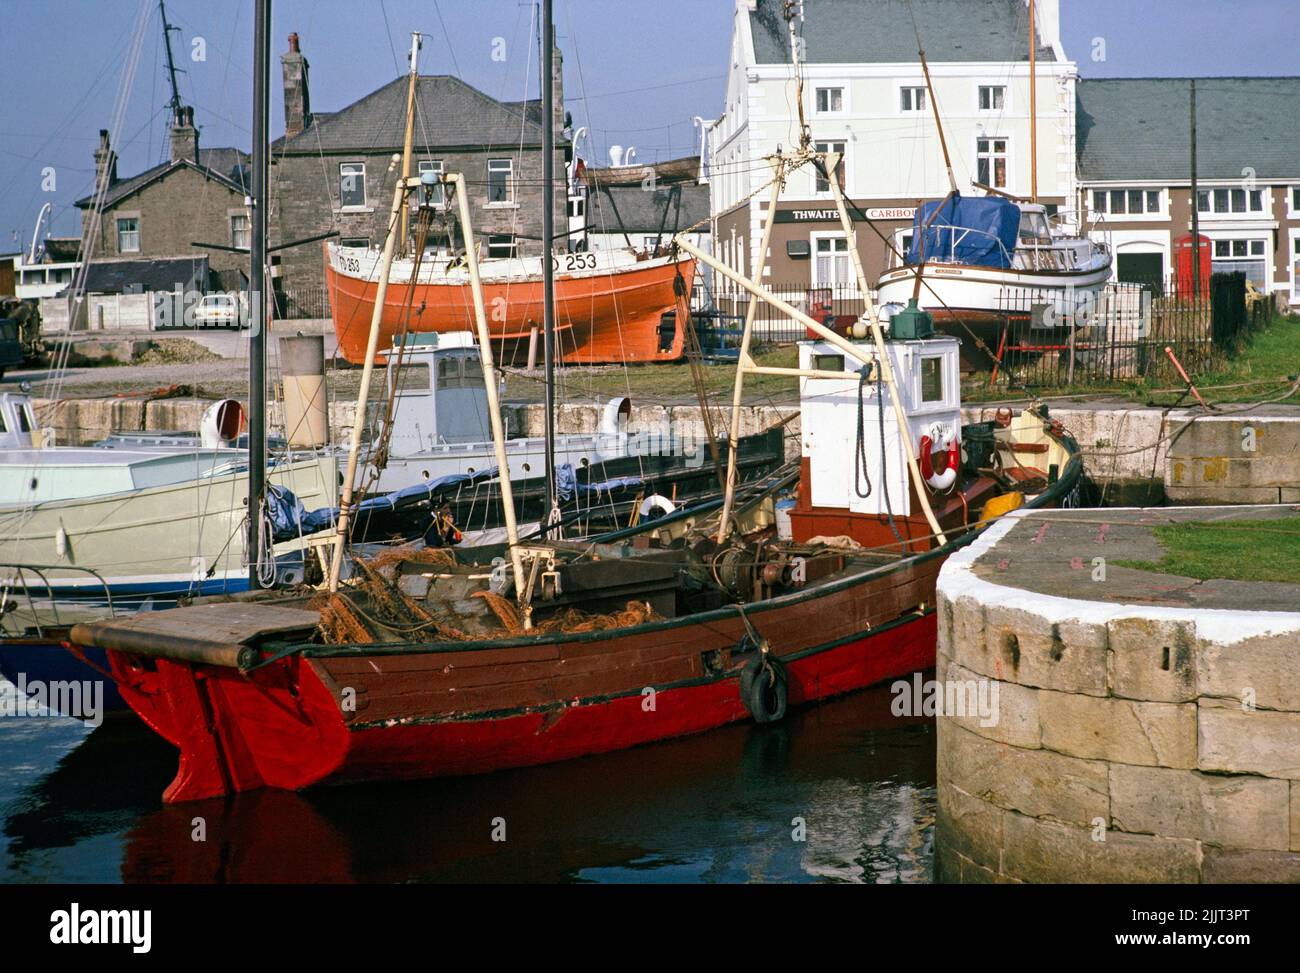 Fishing boats in Glasson dock by the Caribou Inn pub, Lancashire, England, UK 1977 Stock Photo